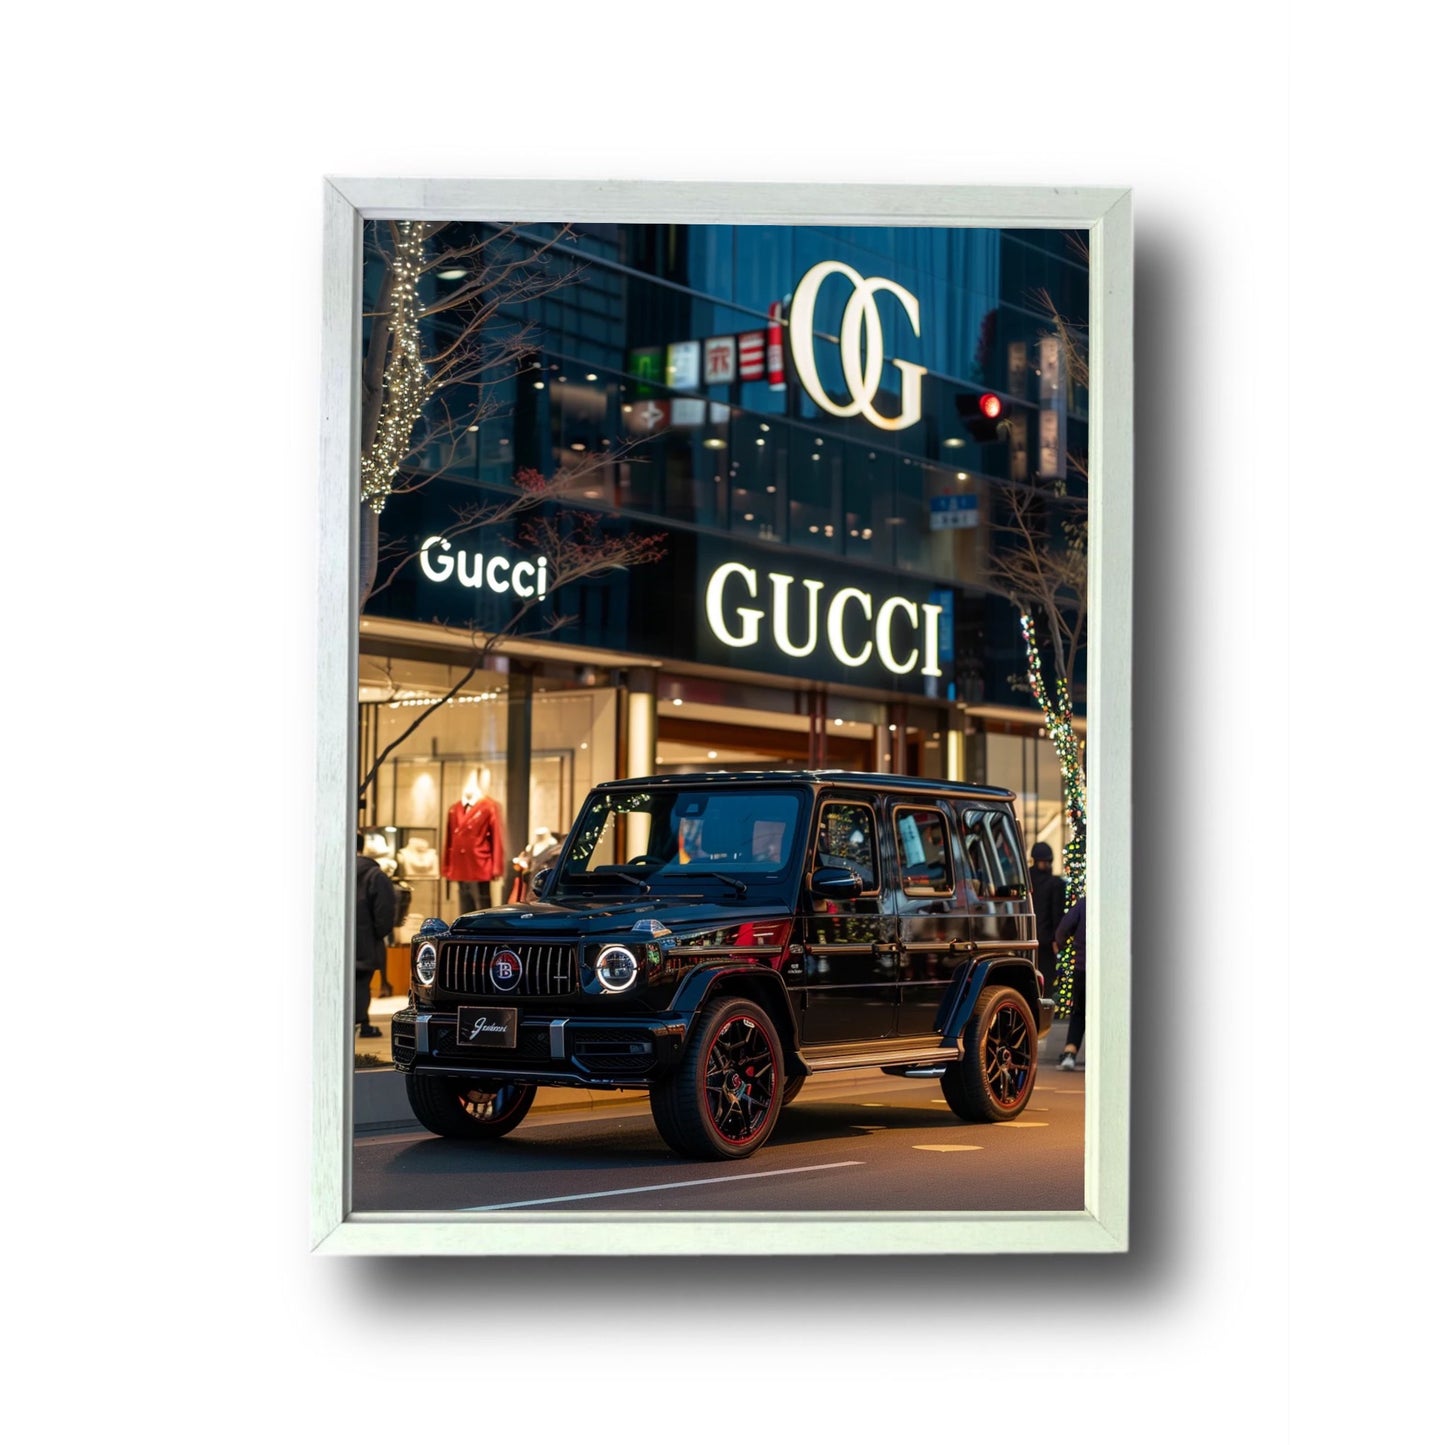 G Wagon Front of Gucci Store 2.0